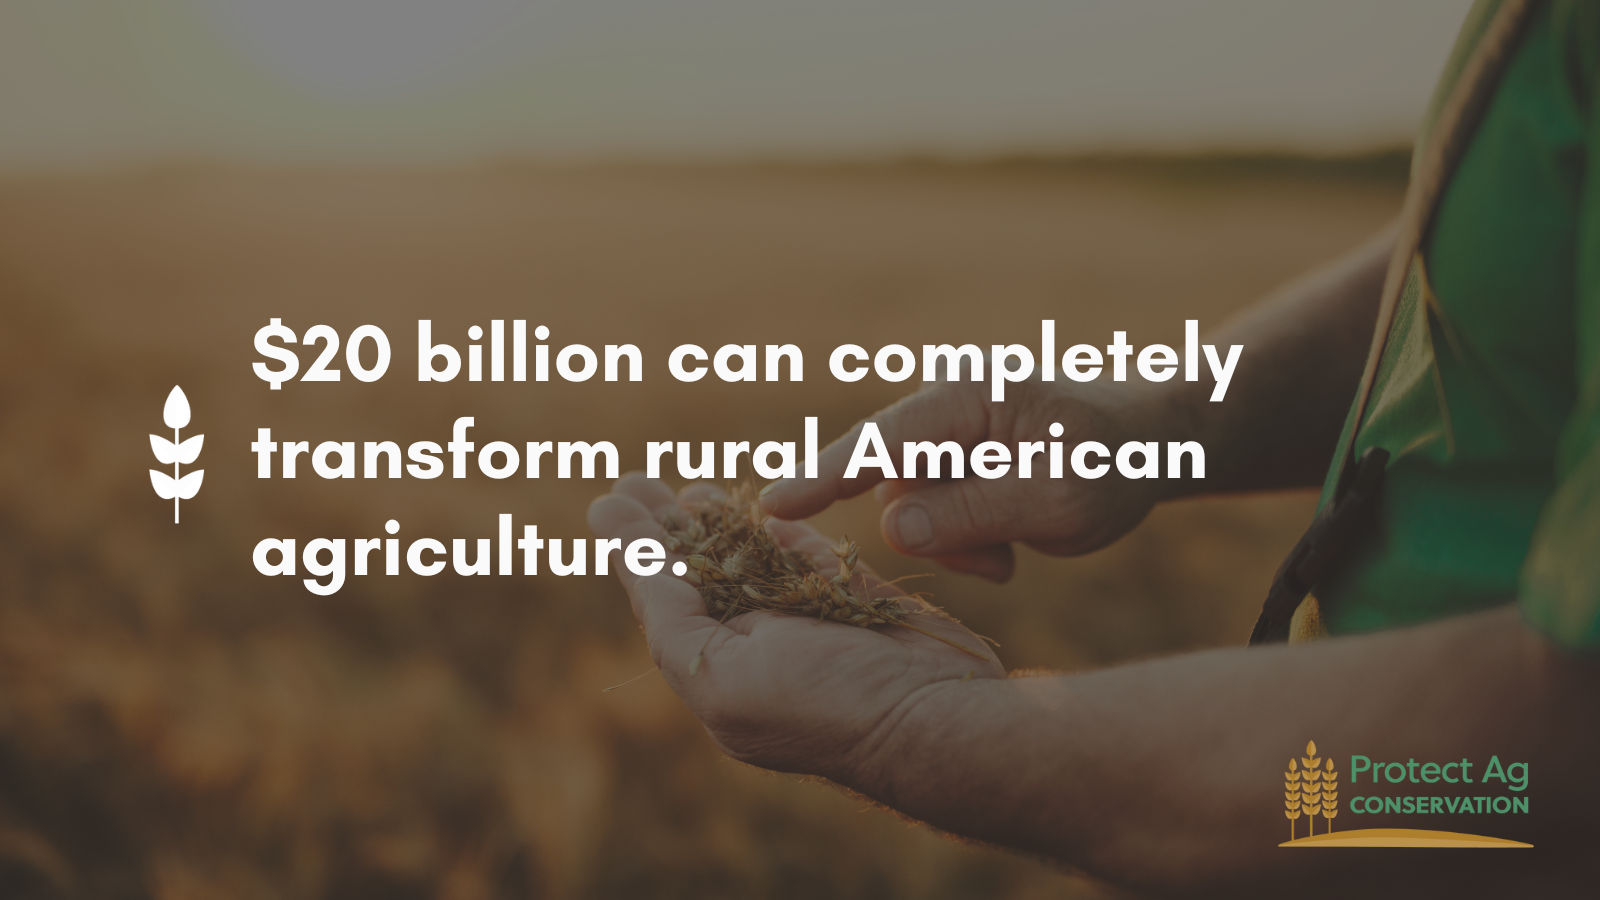 Protect funding for farm conservation programs